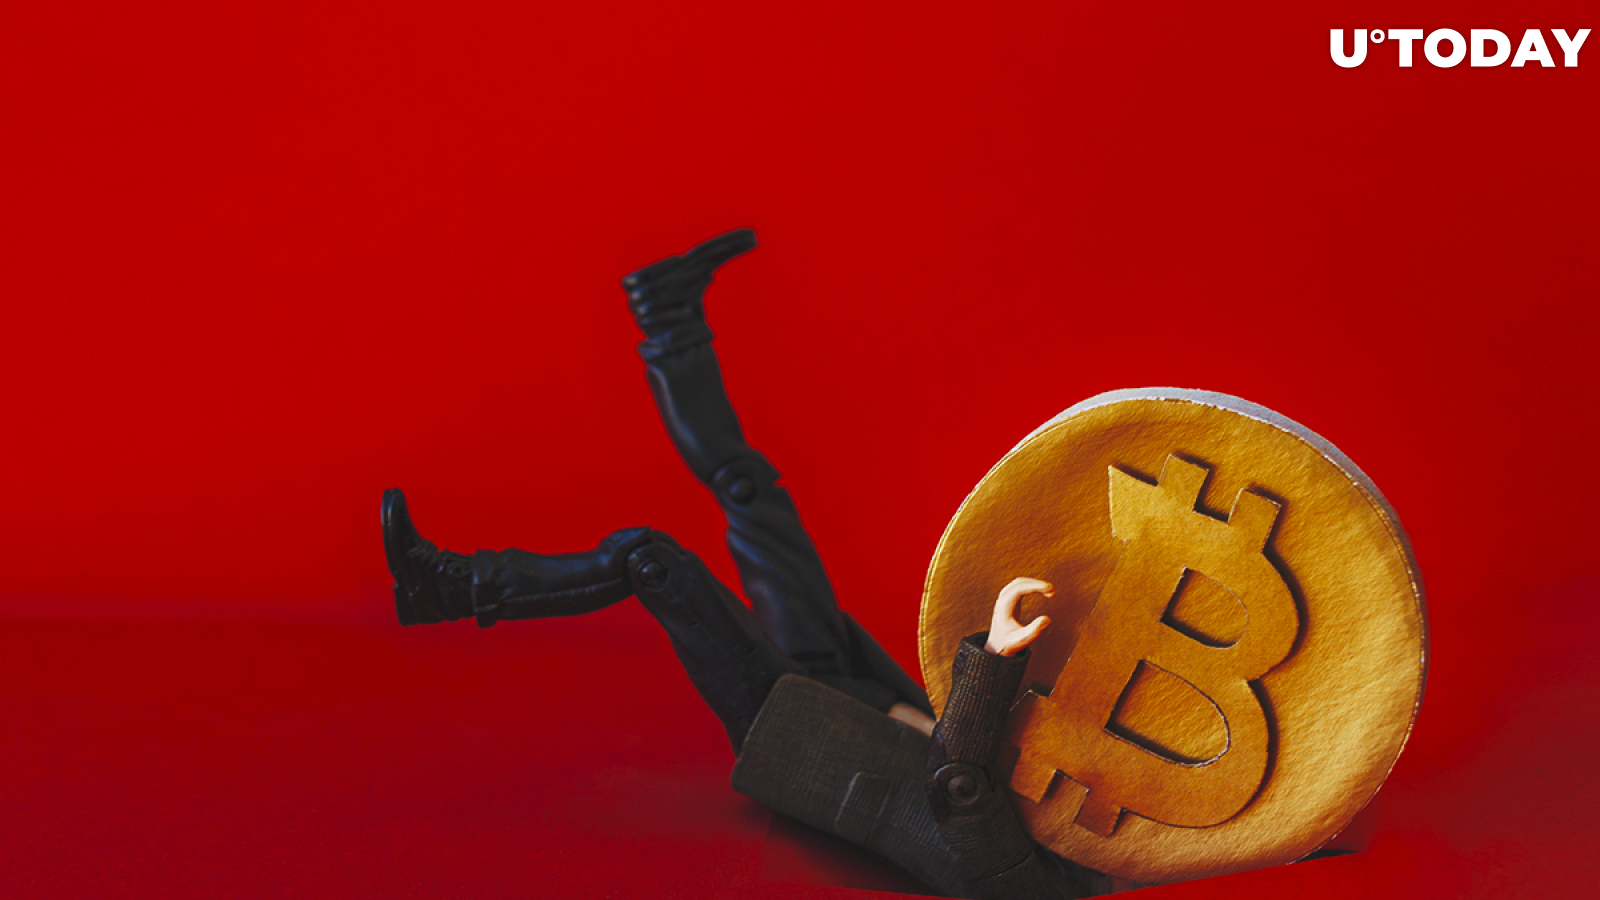 Bitcoin Price Loses Almost $1,000 Overnight, Pulling Crypto Market into Red